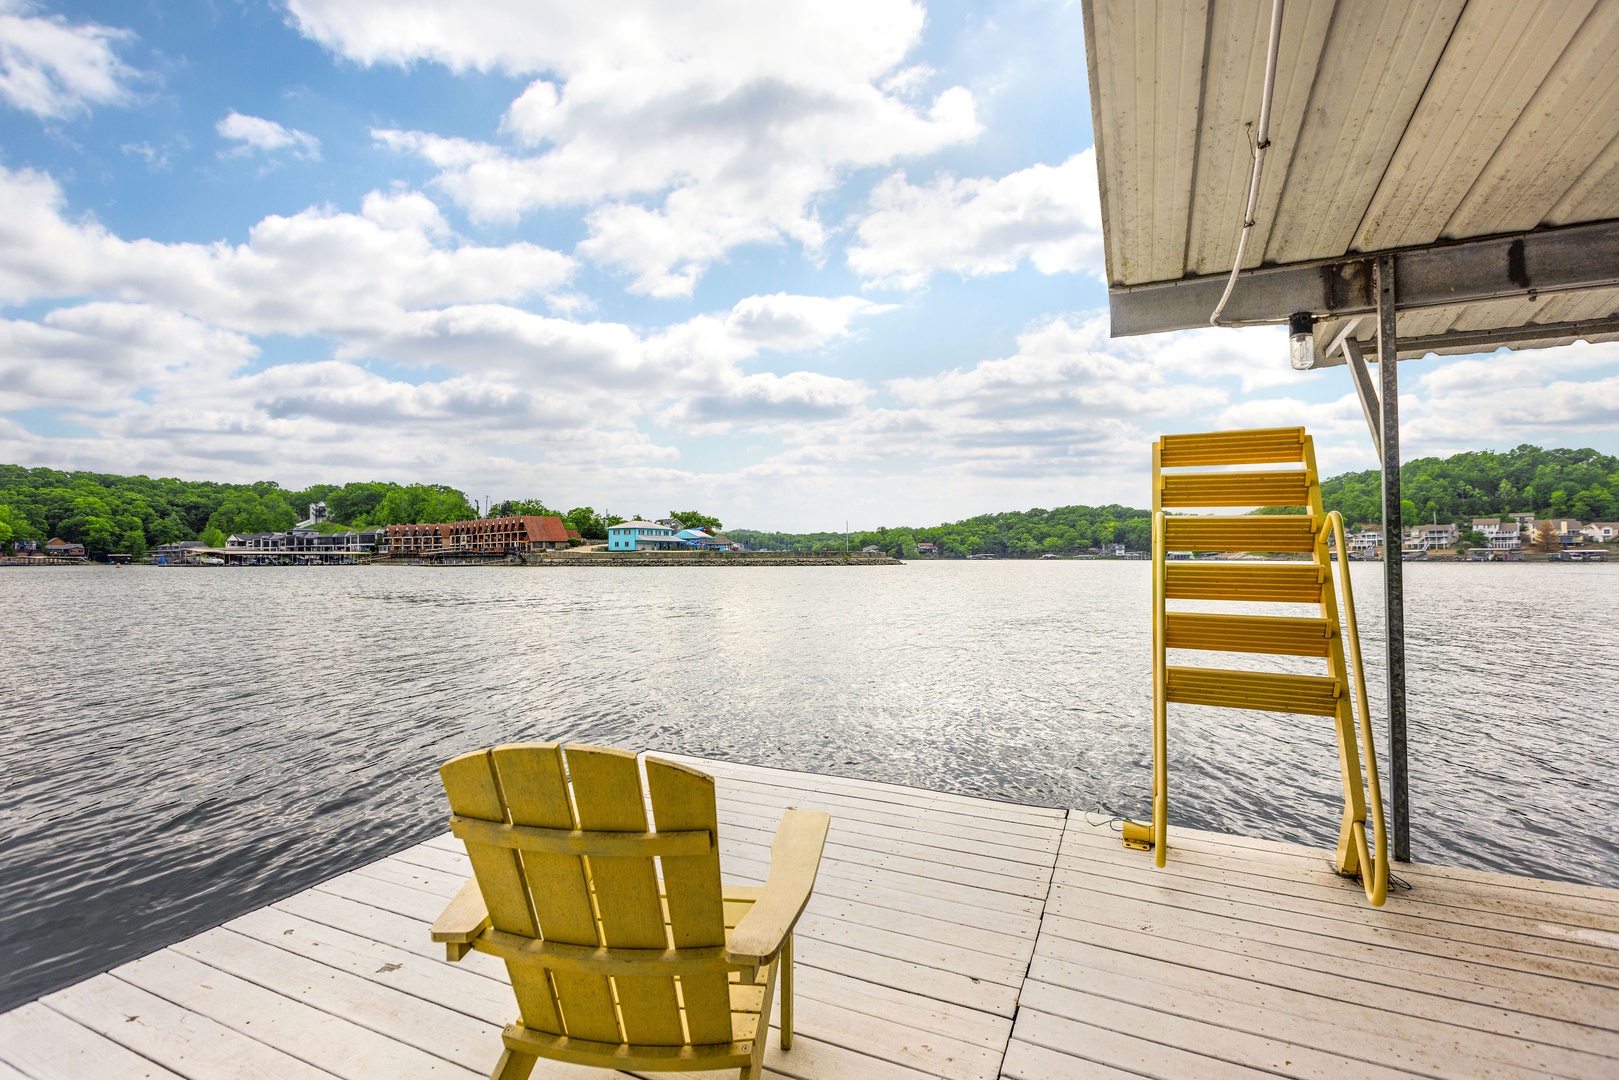 Great dock views and plenty of water to swim and chill